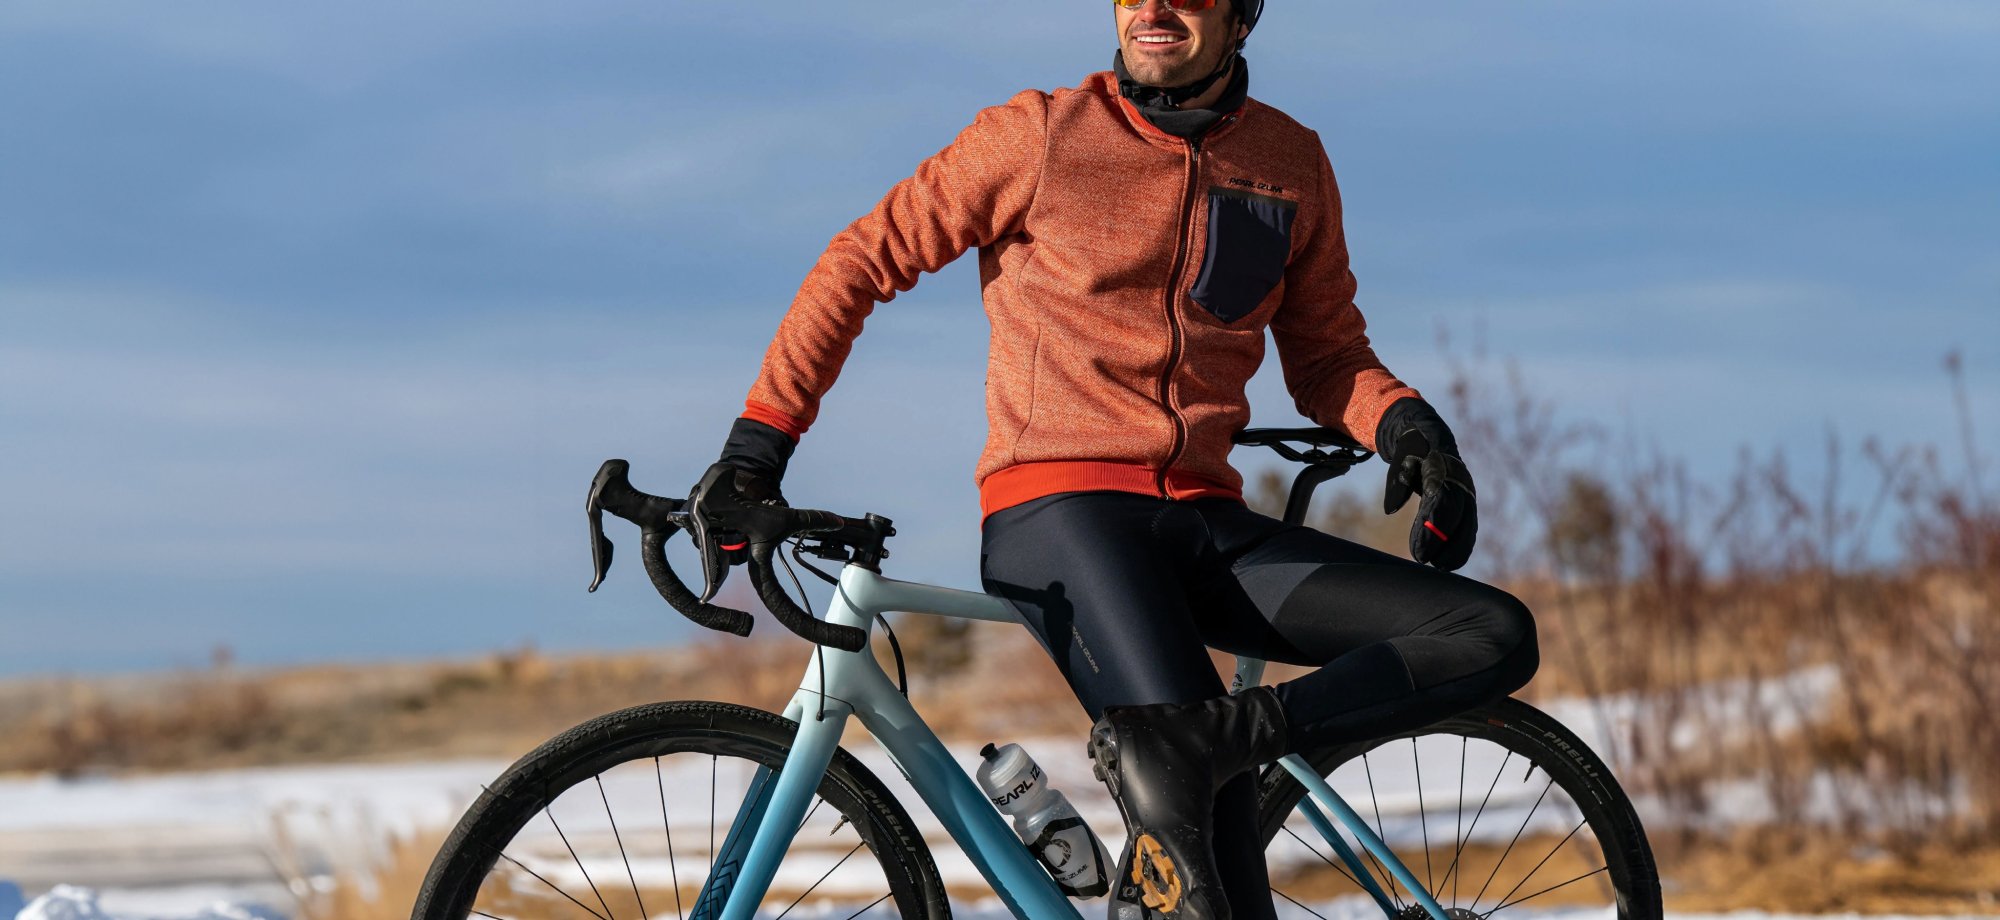 Merino Wool Top Picks - cyclists on road in cold weather clothing